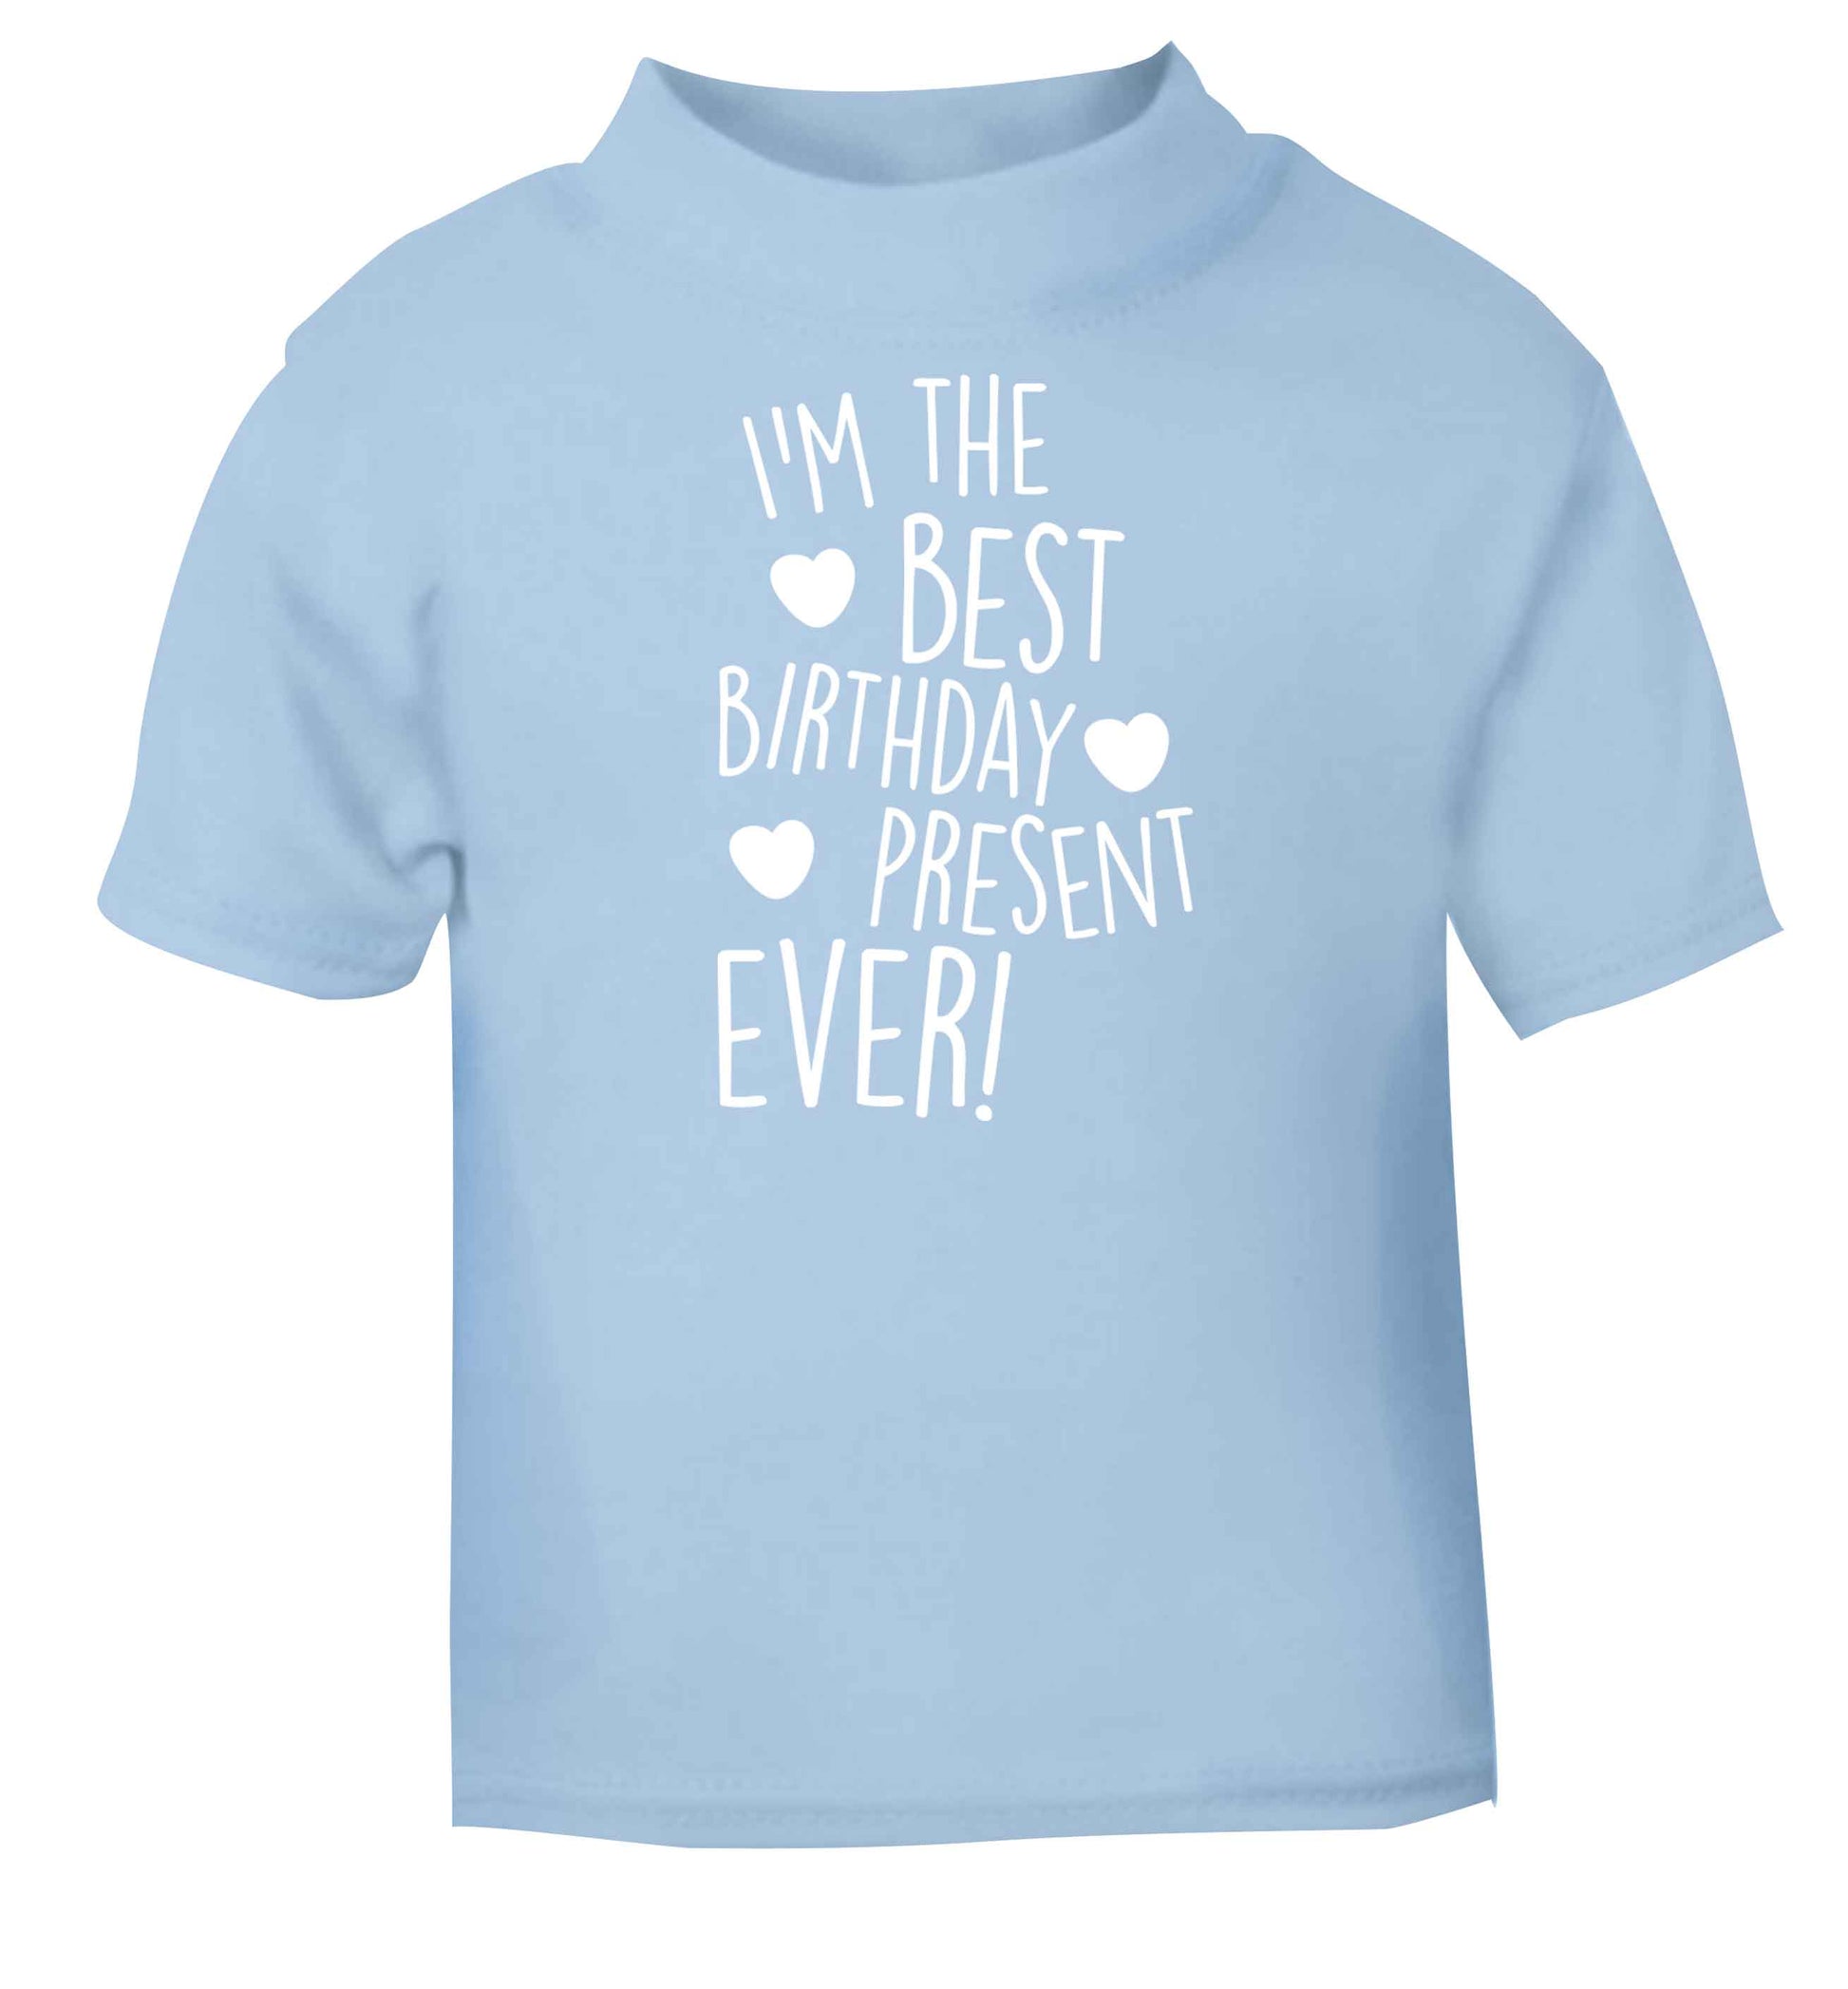 I'm the best birthday present ever light blue baby toddler Tshirt 2 Years